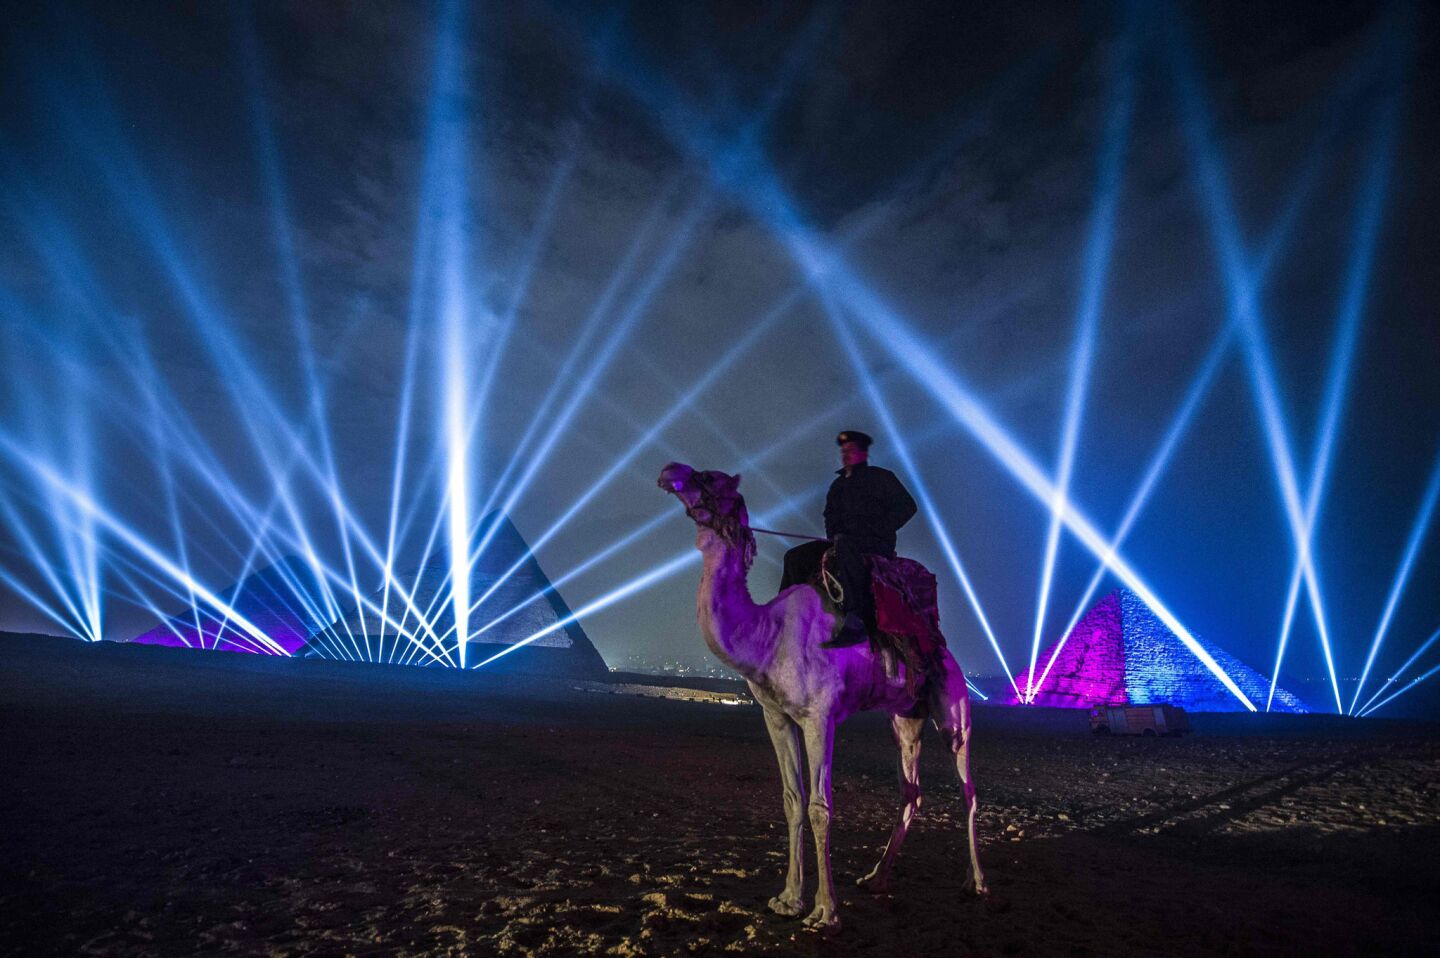 An Egyptian policeman stands guard during New Year celebrations in front of the pyramids near Cairo.